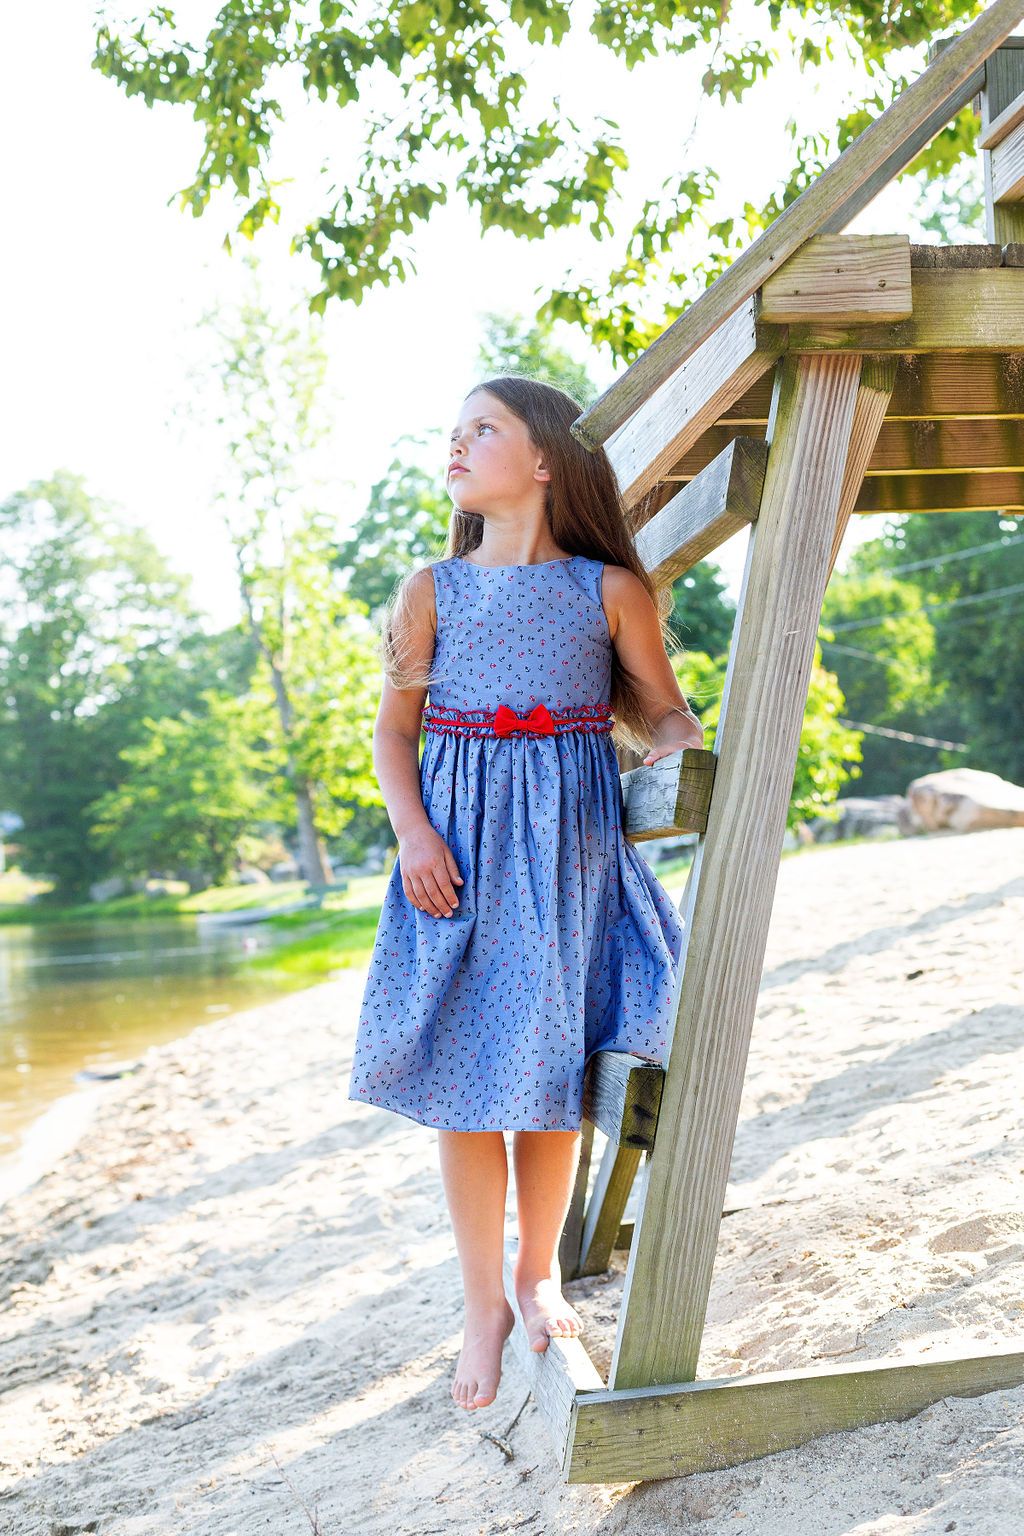 Dress - Anchor Print Cotton Dress With Bow